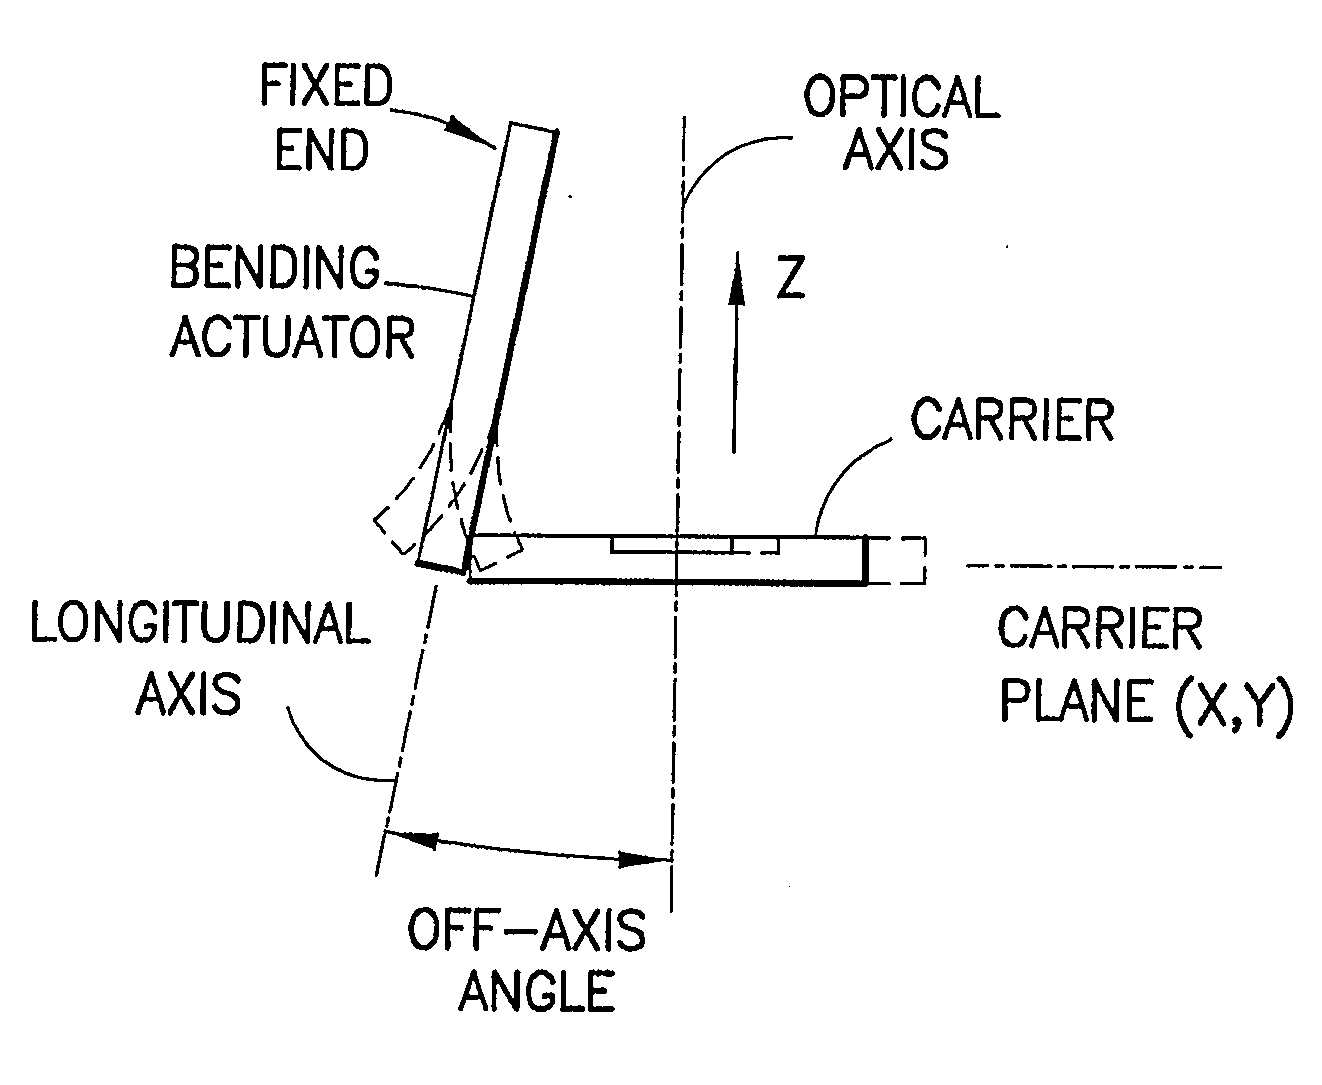 Method and System for Image Stabilization